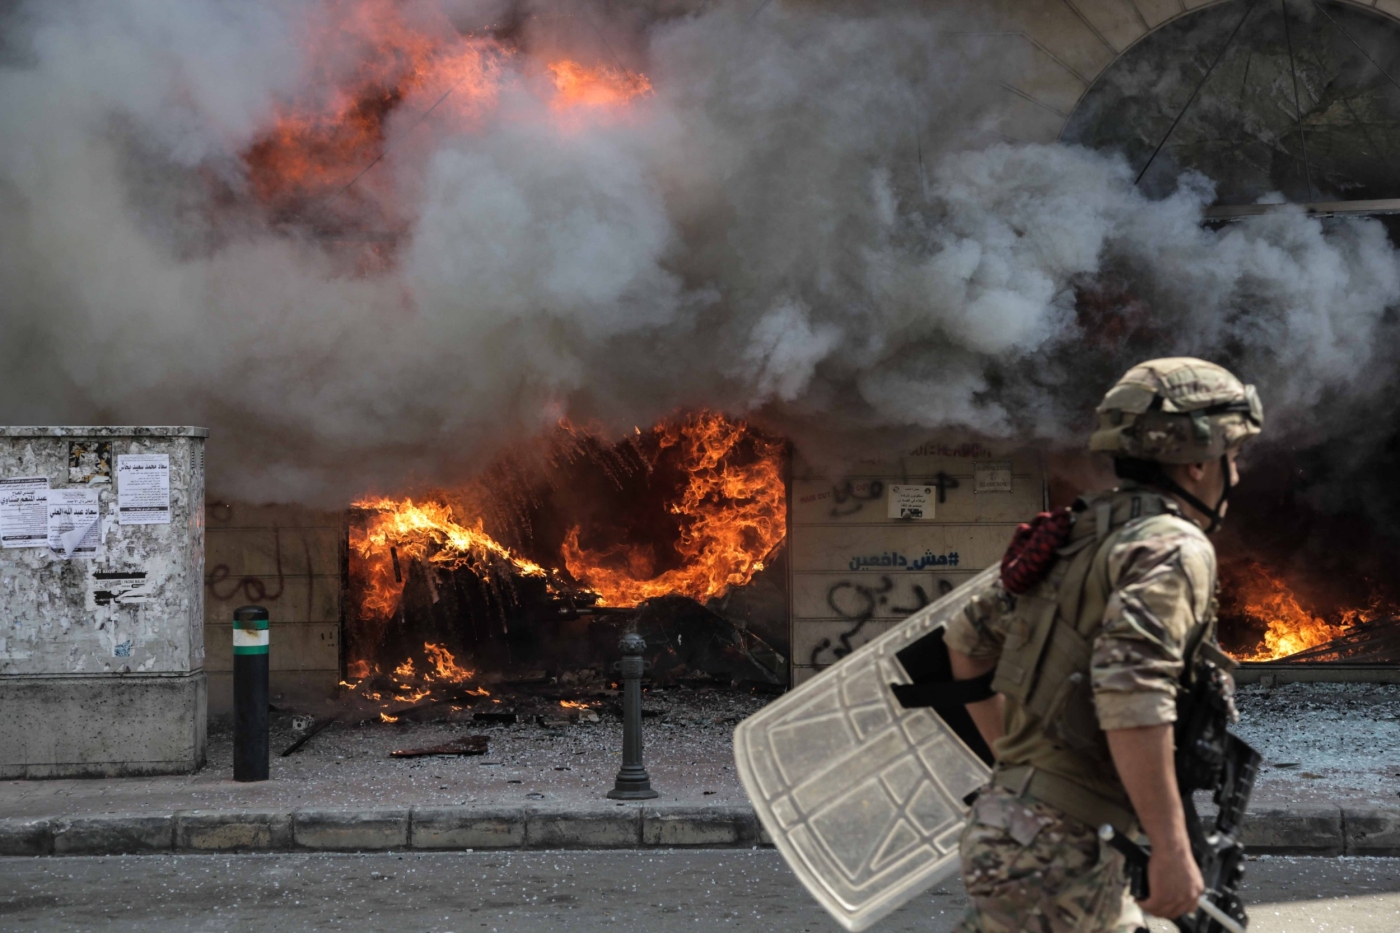 A soldier walks past a burning bank branch in Tripoli, Lebanon on 28 April 2020, during protests following the death of Fawaz Fouad Samman, a 26-year-old demonstrator shot by the army the previous night (MEE/Elizabeth Fitt)